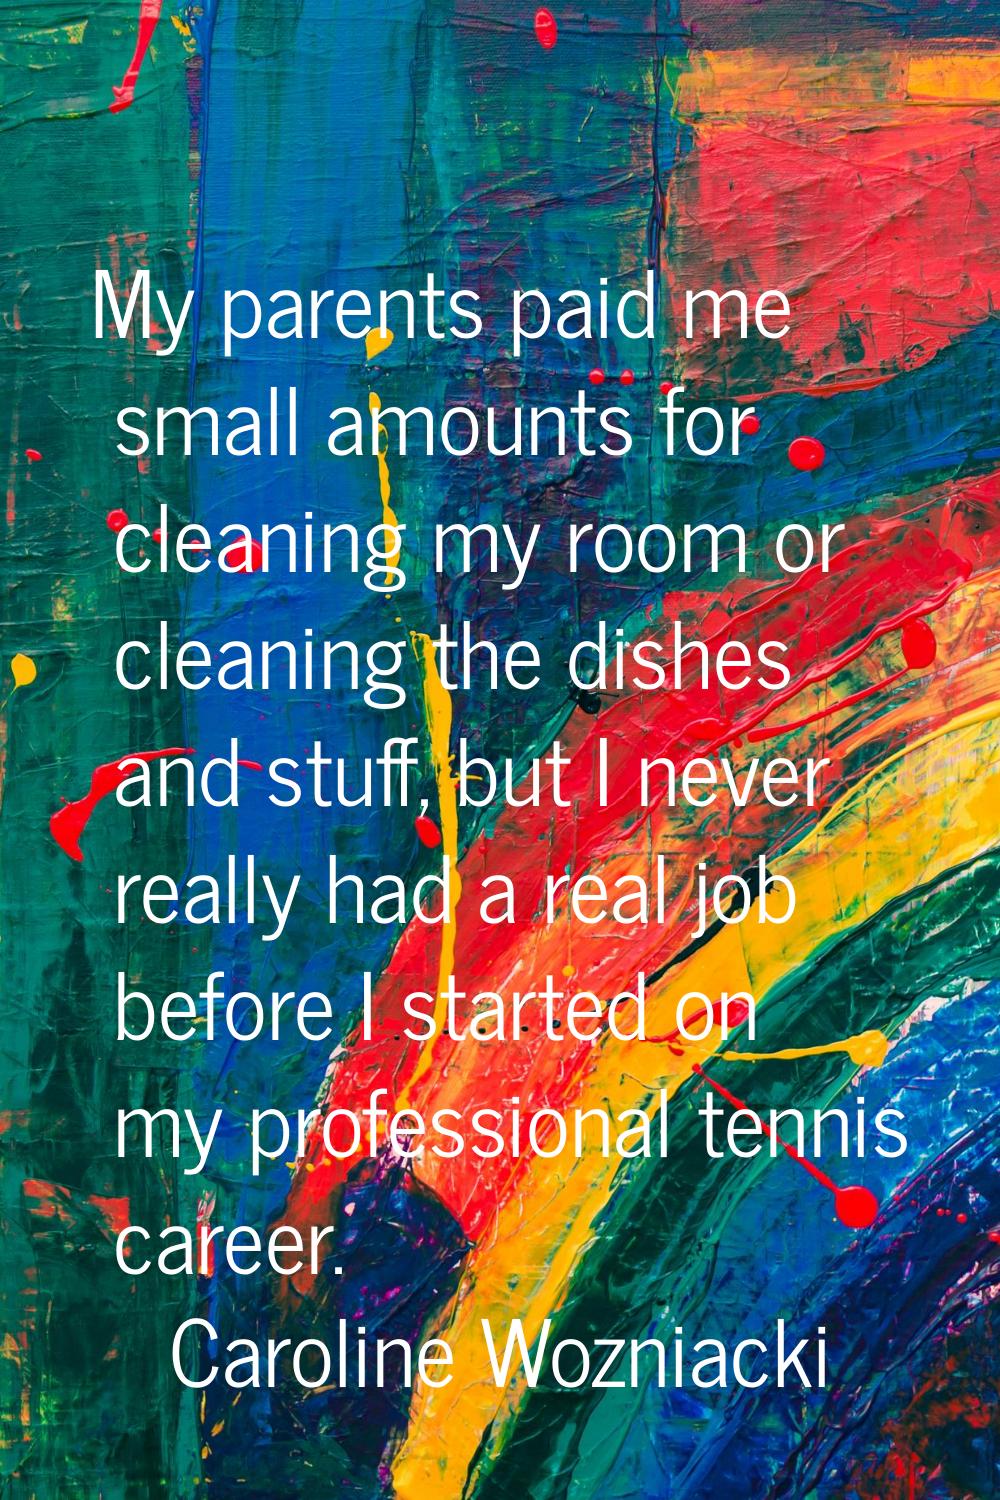 My parents paid me small amounts for cleaning my room or cleaning the dishes and stuff, but I never